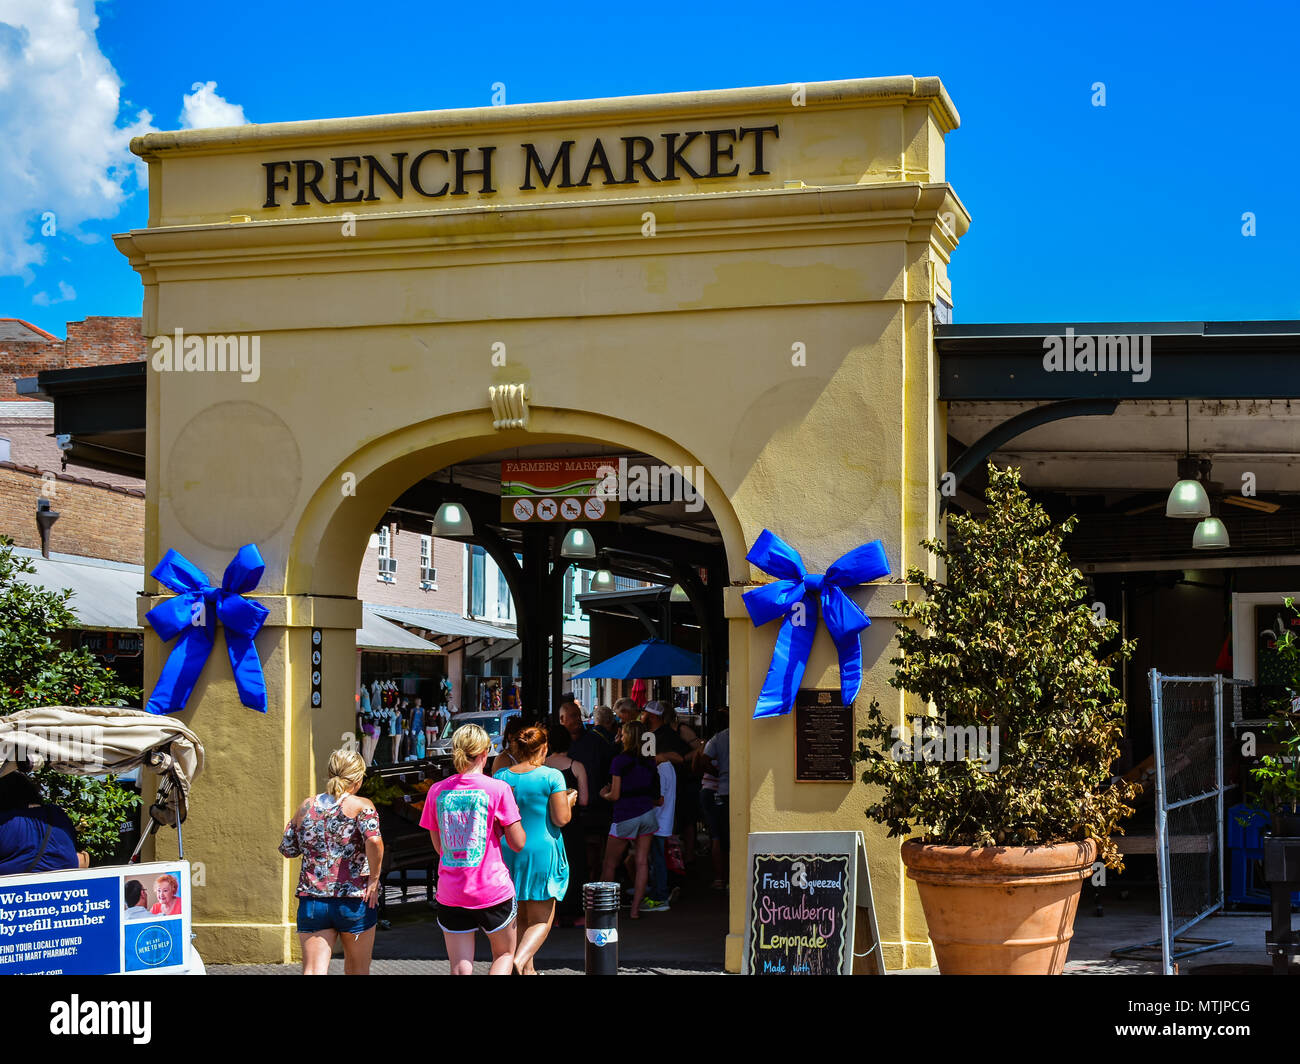 New Orleans, LA - Sep. 24, 2017: The Historic French Market - it is America’s oldest public market. Stock Photo